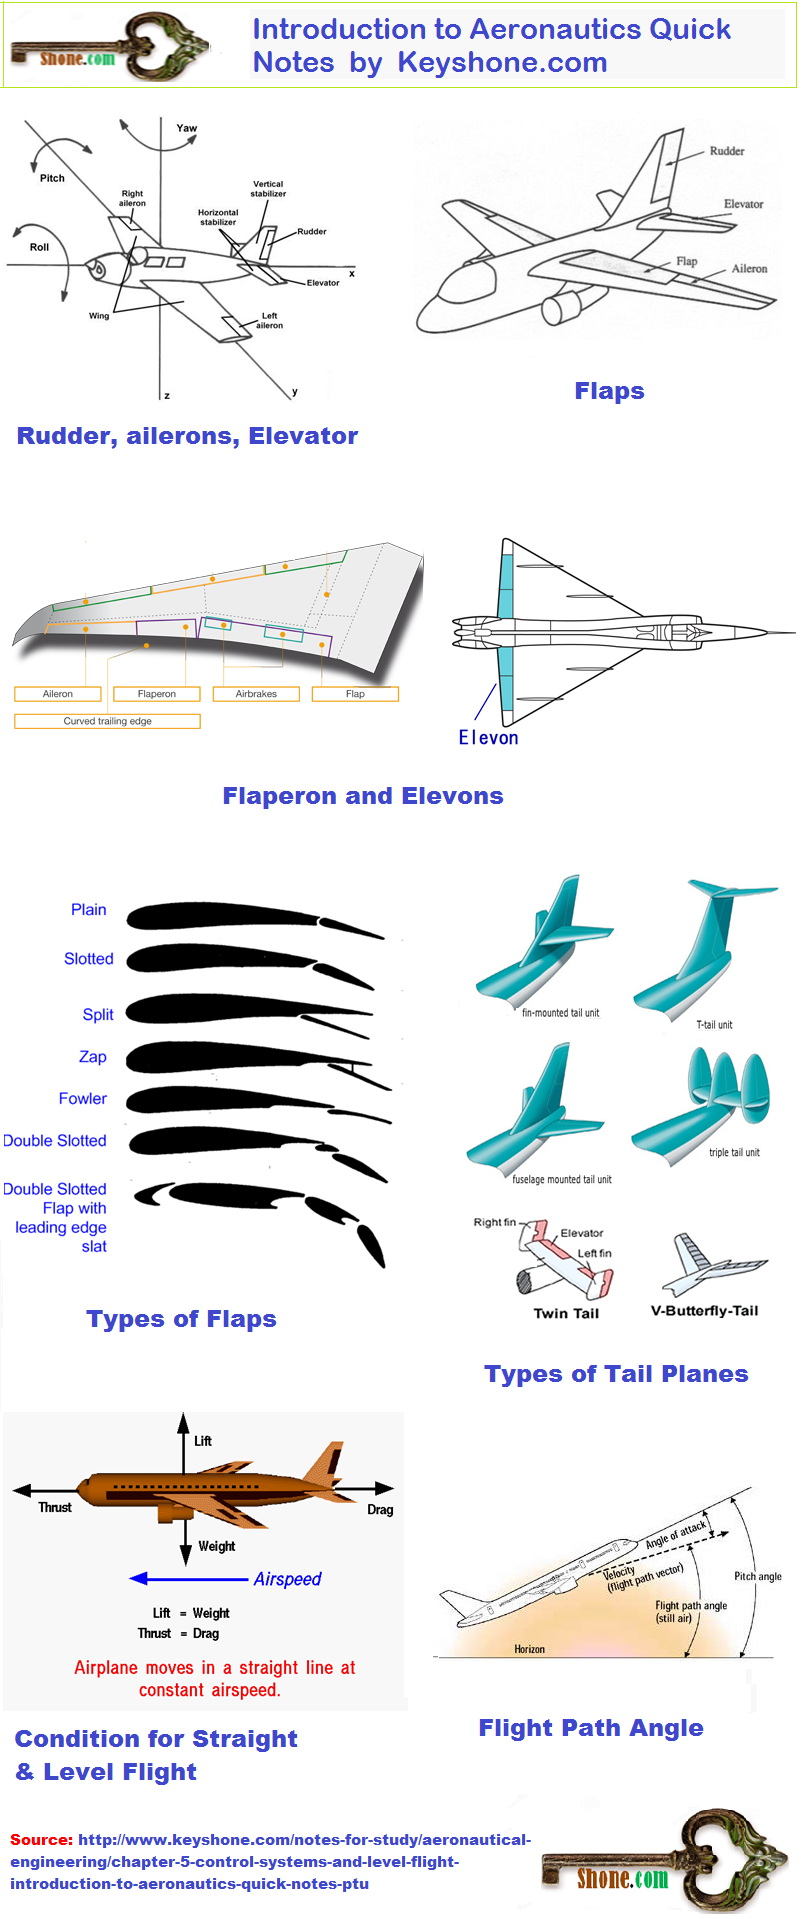 Rudder is also a control surface of aircraft control systems and level flight.It is a hinged surface at trailing edge of vertical tail stabilizer of an aircraft.these are used for Yawing motion of aircraft